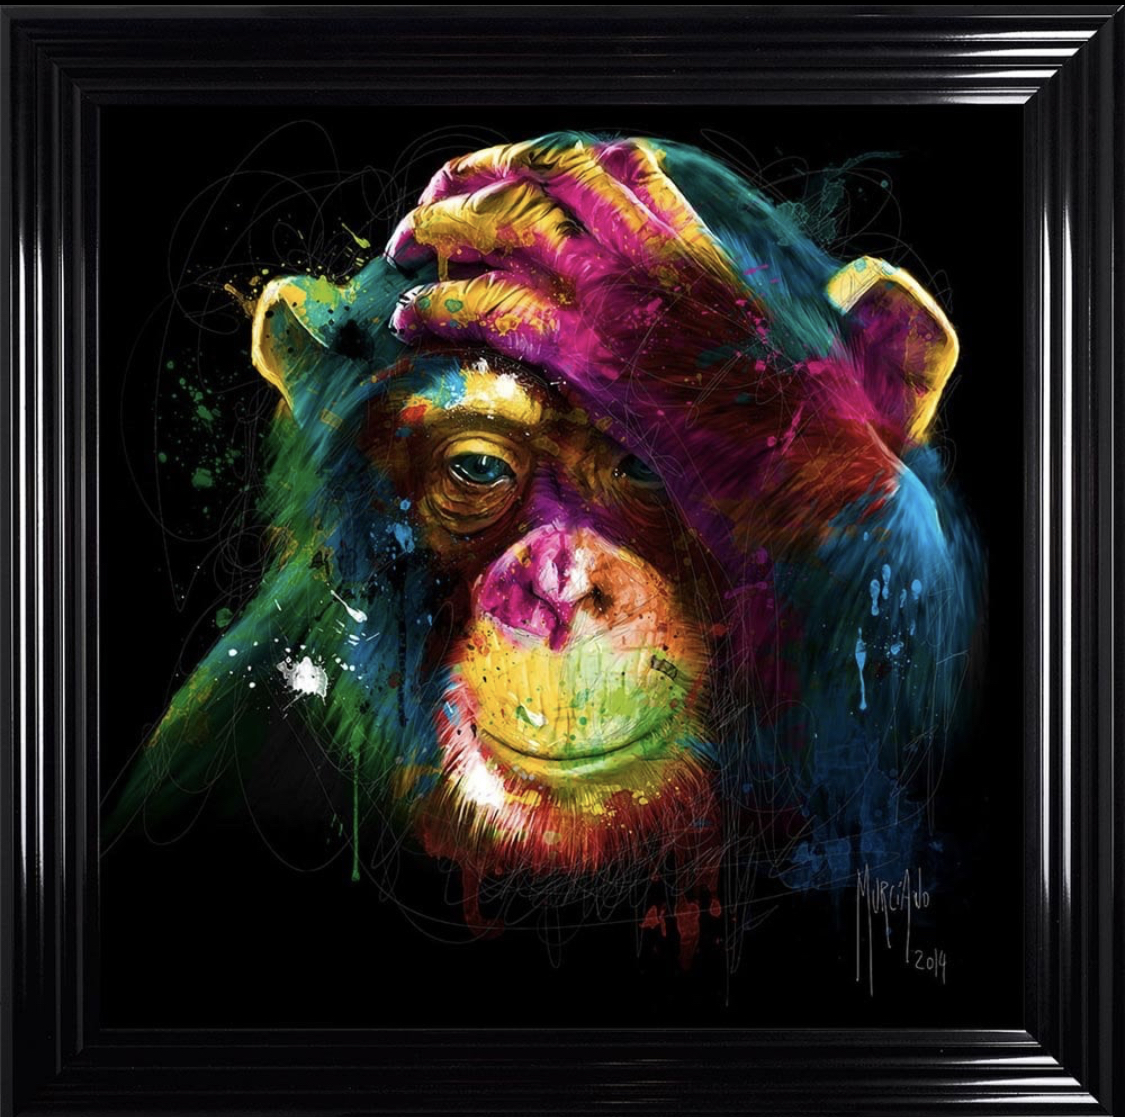 The Darwin's Preoccupations by Patrice Murciano - Sheldon Galleries